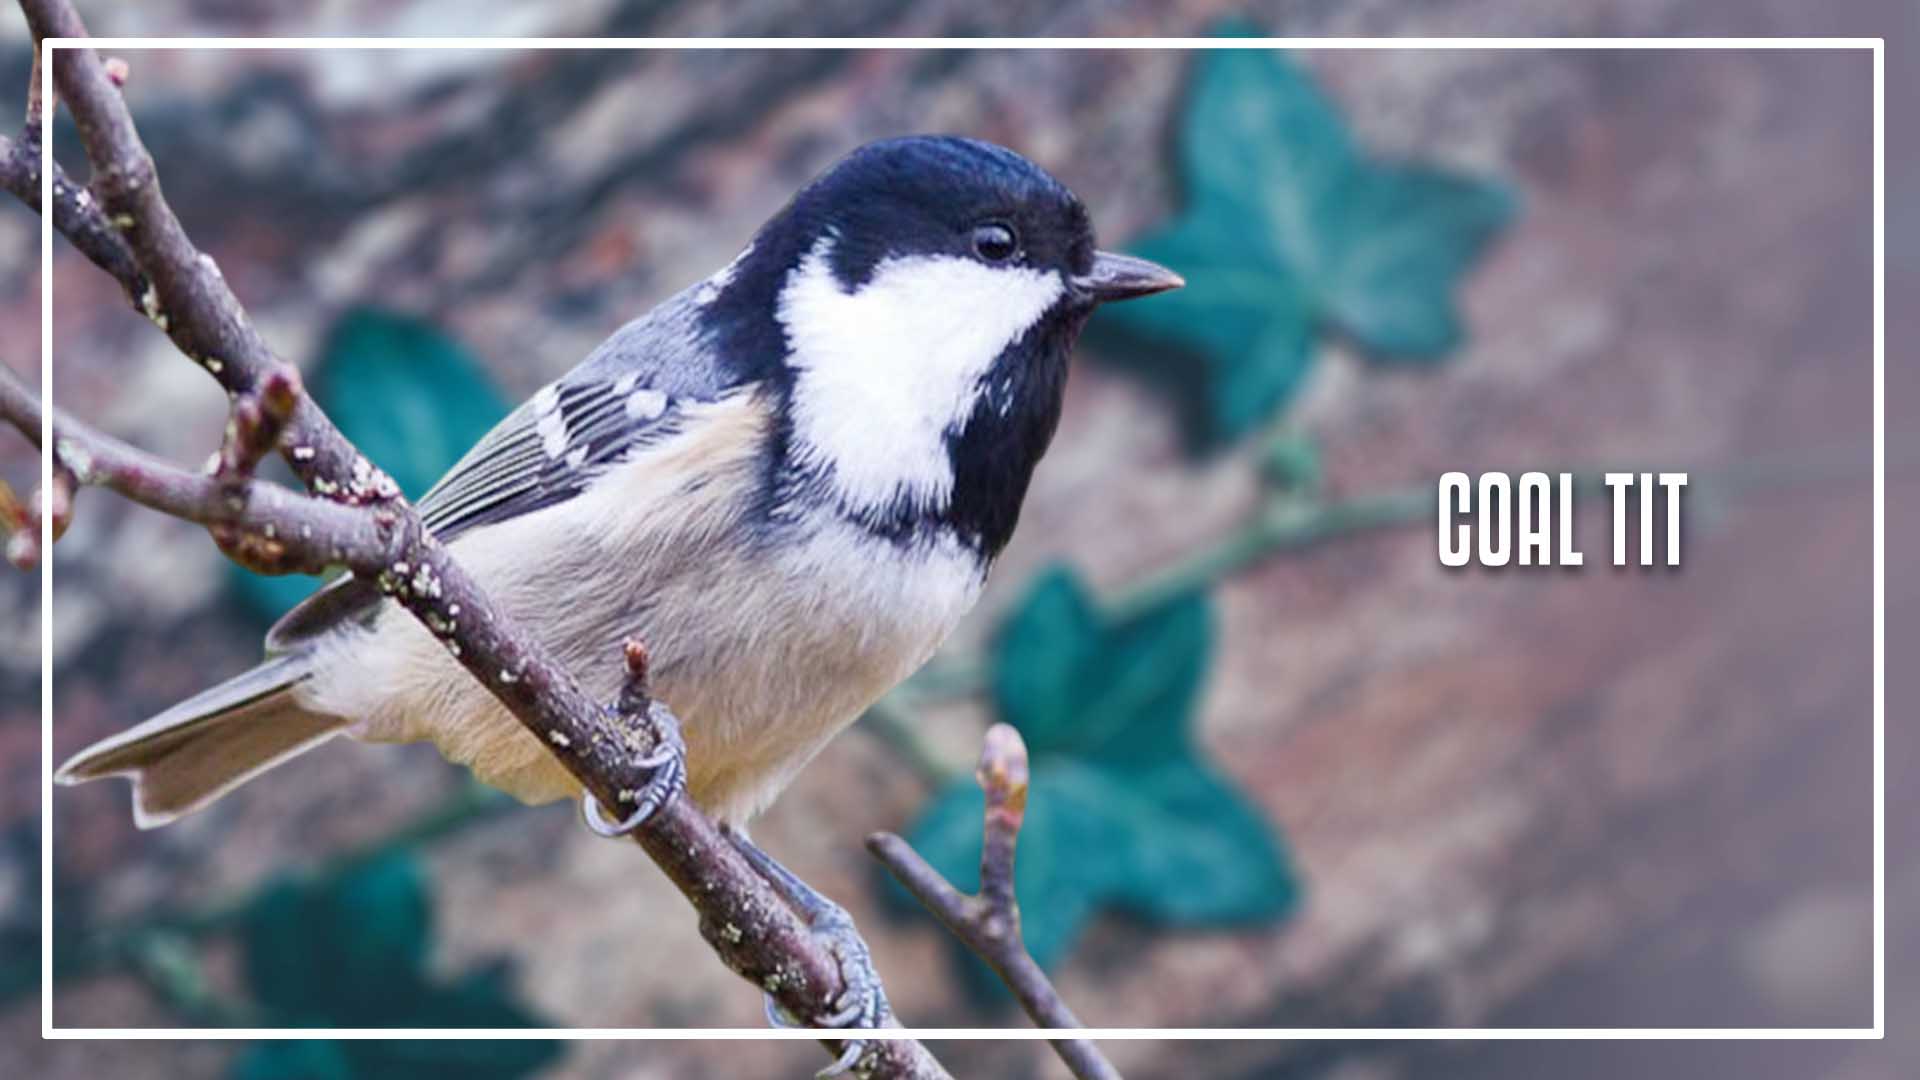 Types of Tit bird is a great tit